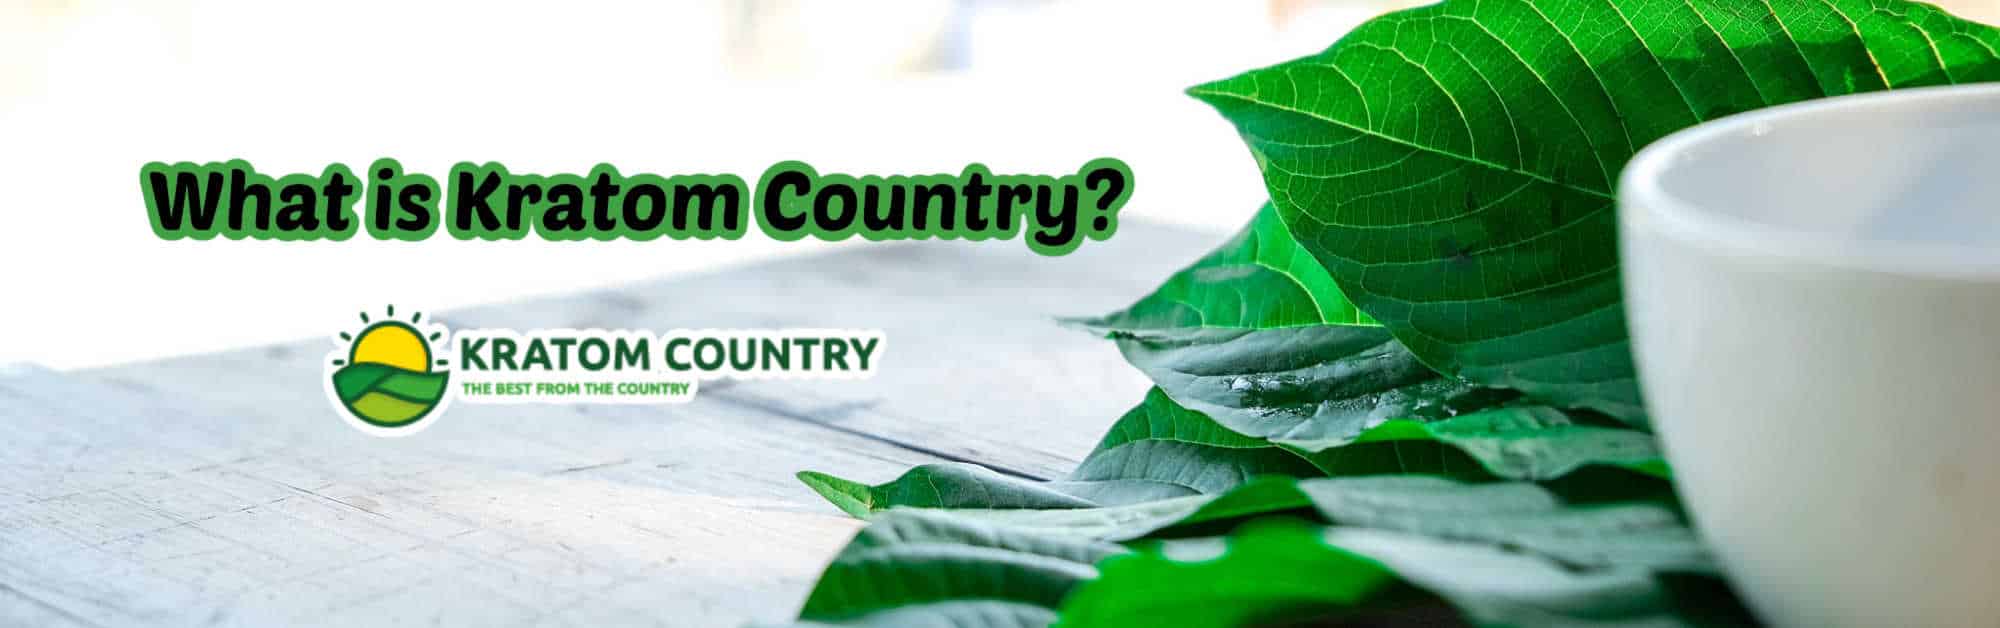 image of what is kratom country